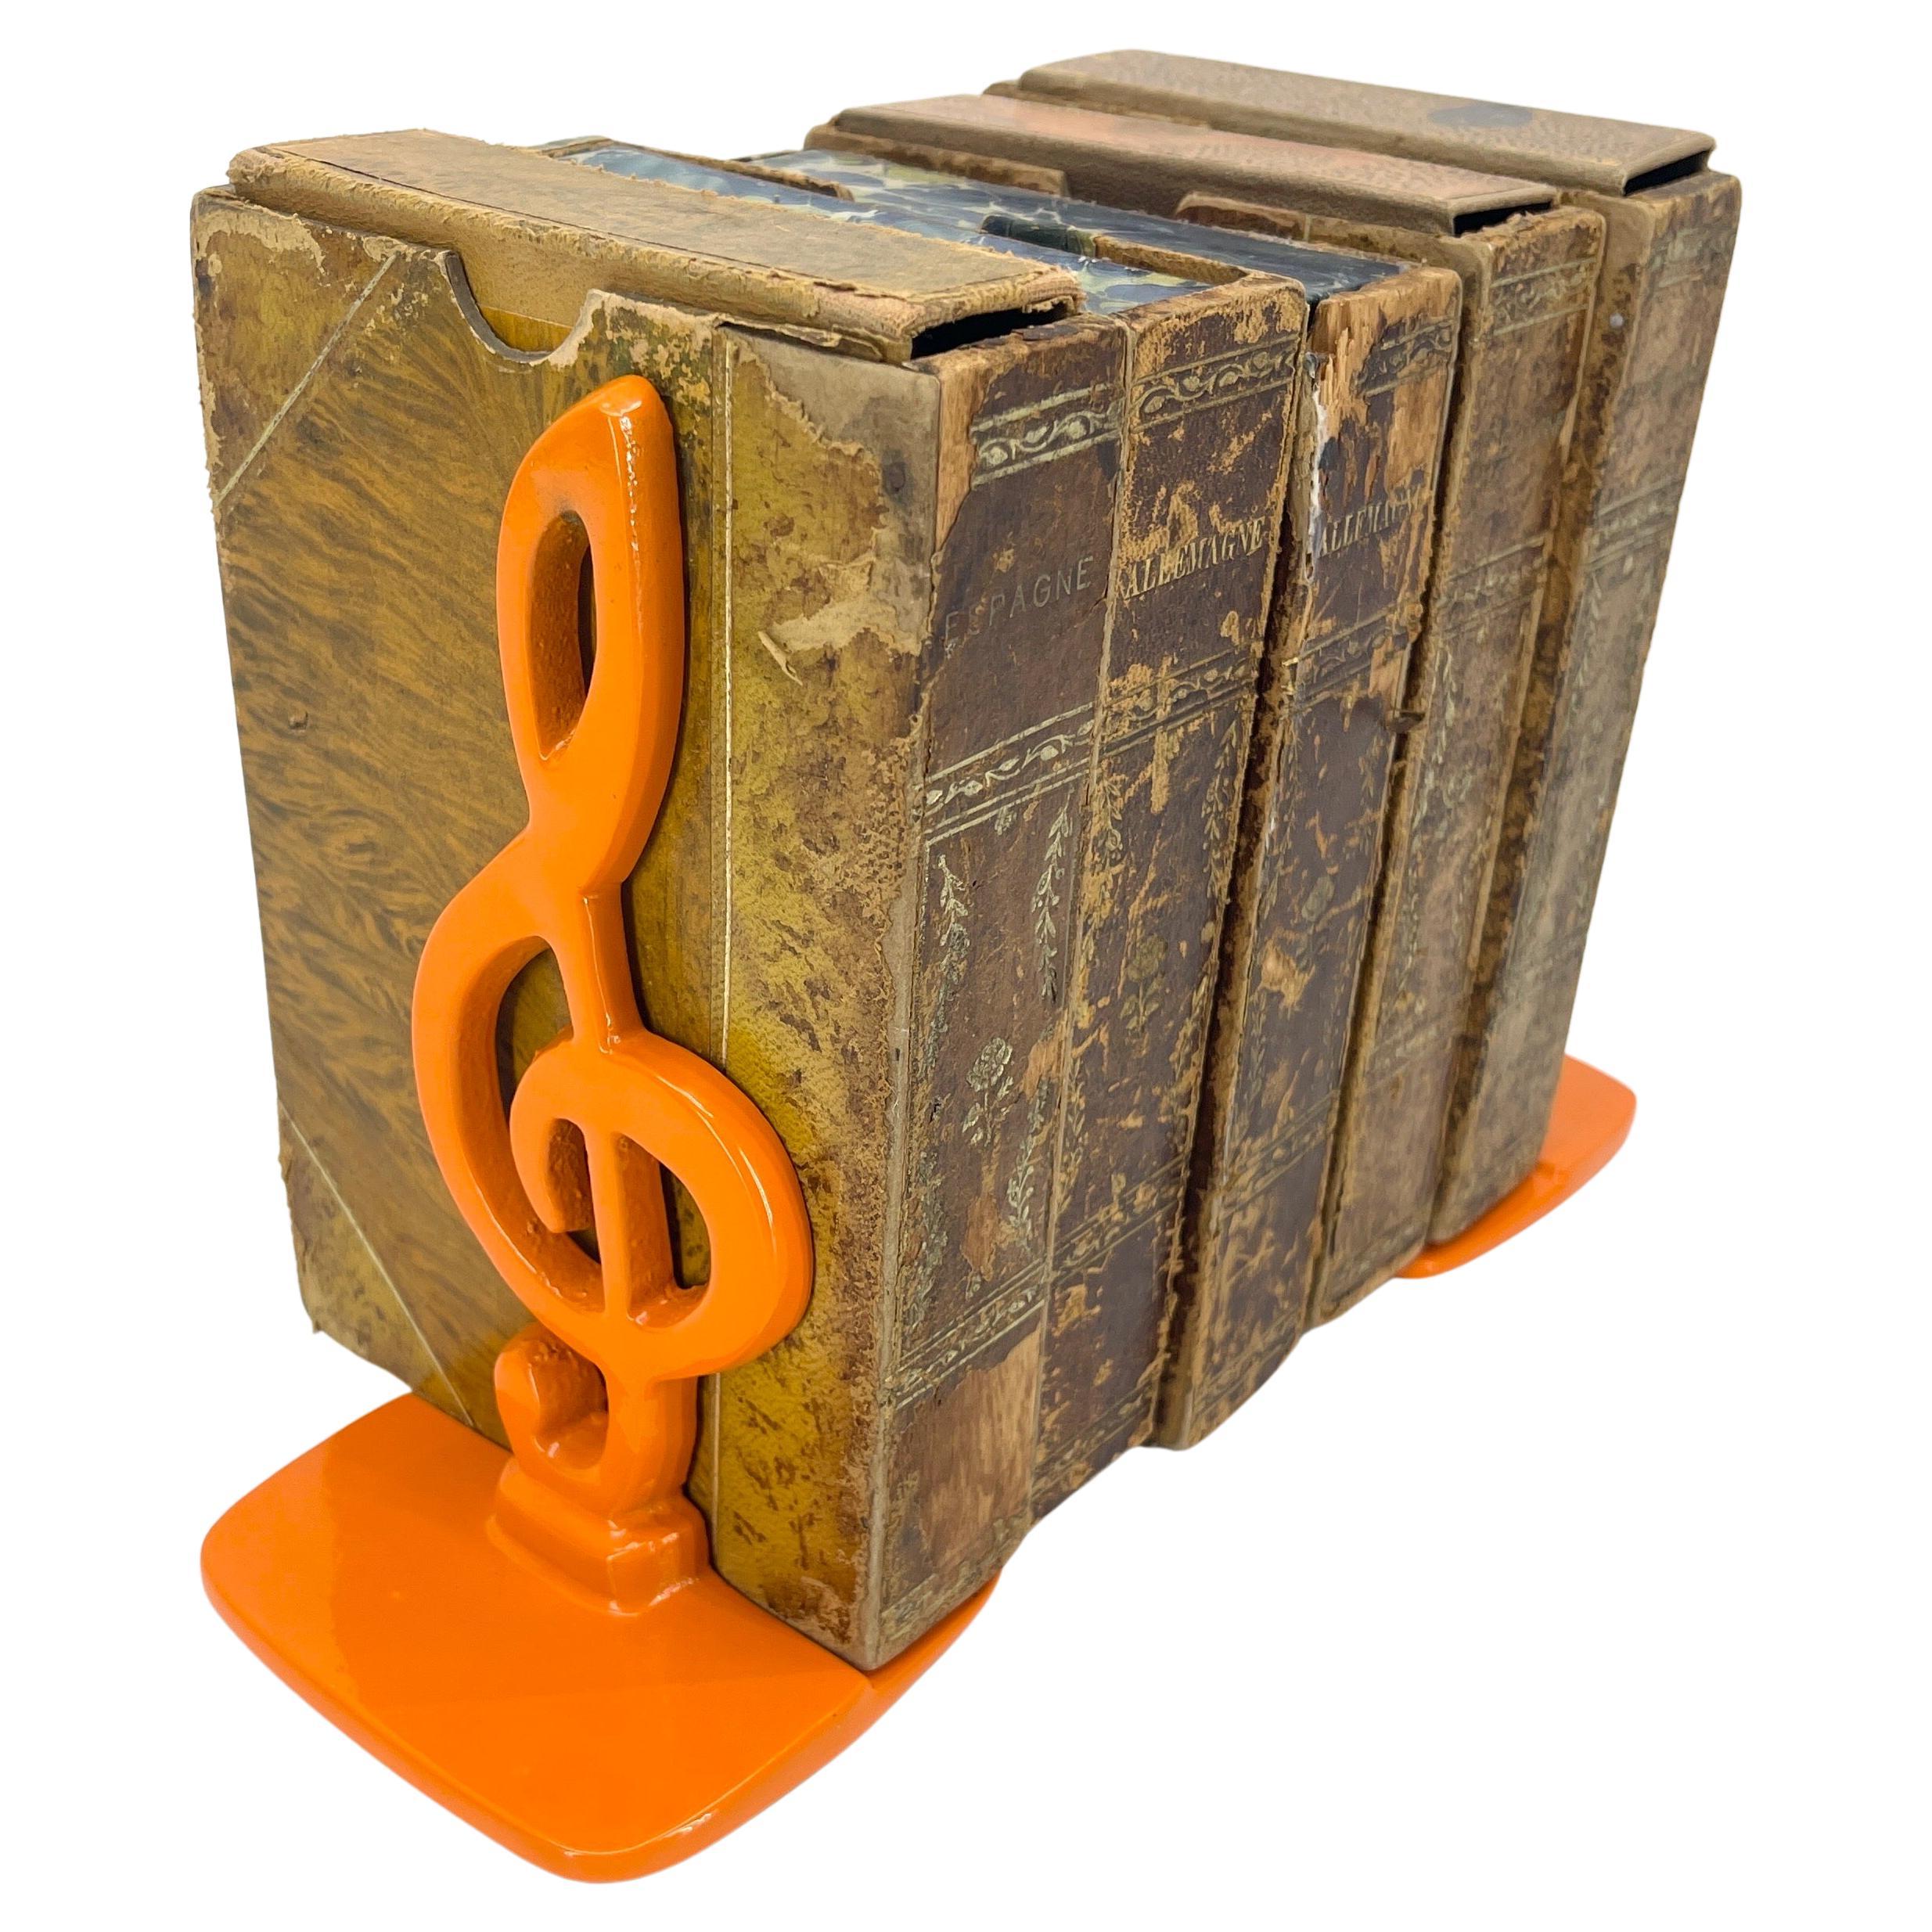 Powder-Coated Orange Set of Music Note Bookends

Pair of vintage brass bookends in newly powder-coated orange. This pair are classic music notes on a square base. Absolutely one of a kind, these bookends will accentuate your home on a bookcase,